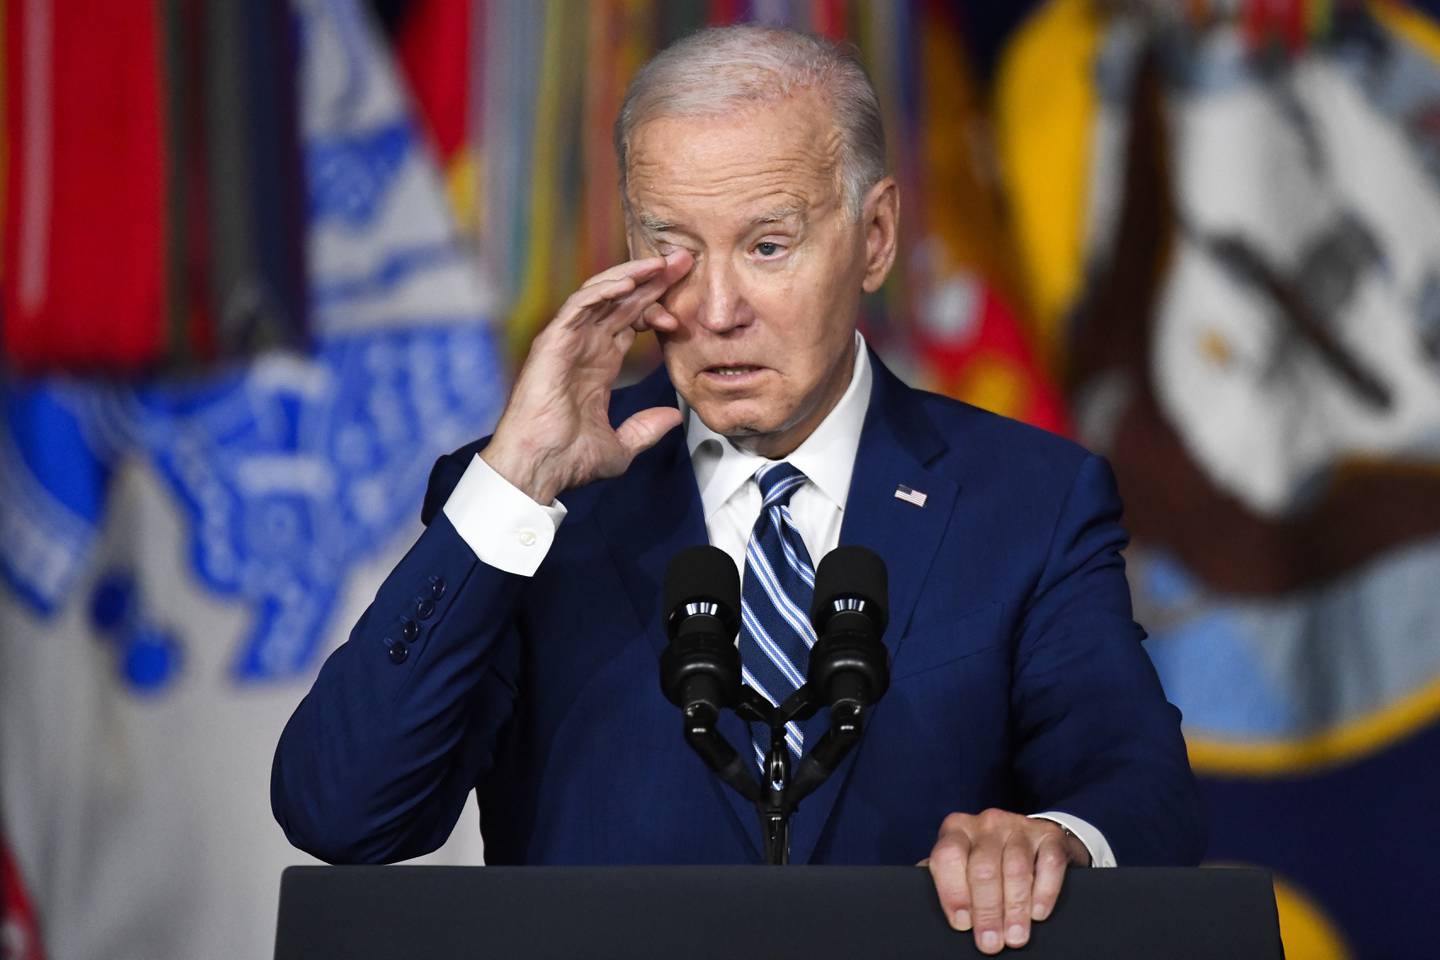 President Joe Biden wipes a tear from his eye while speaking at the George E. Wahlen Department of Veterans Affairs Medical Center, Thursday, Aug. 10, 2023, in Salt Lake City.